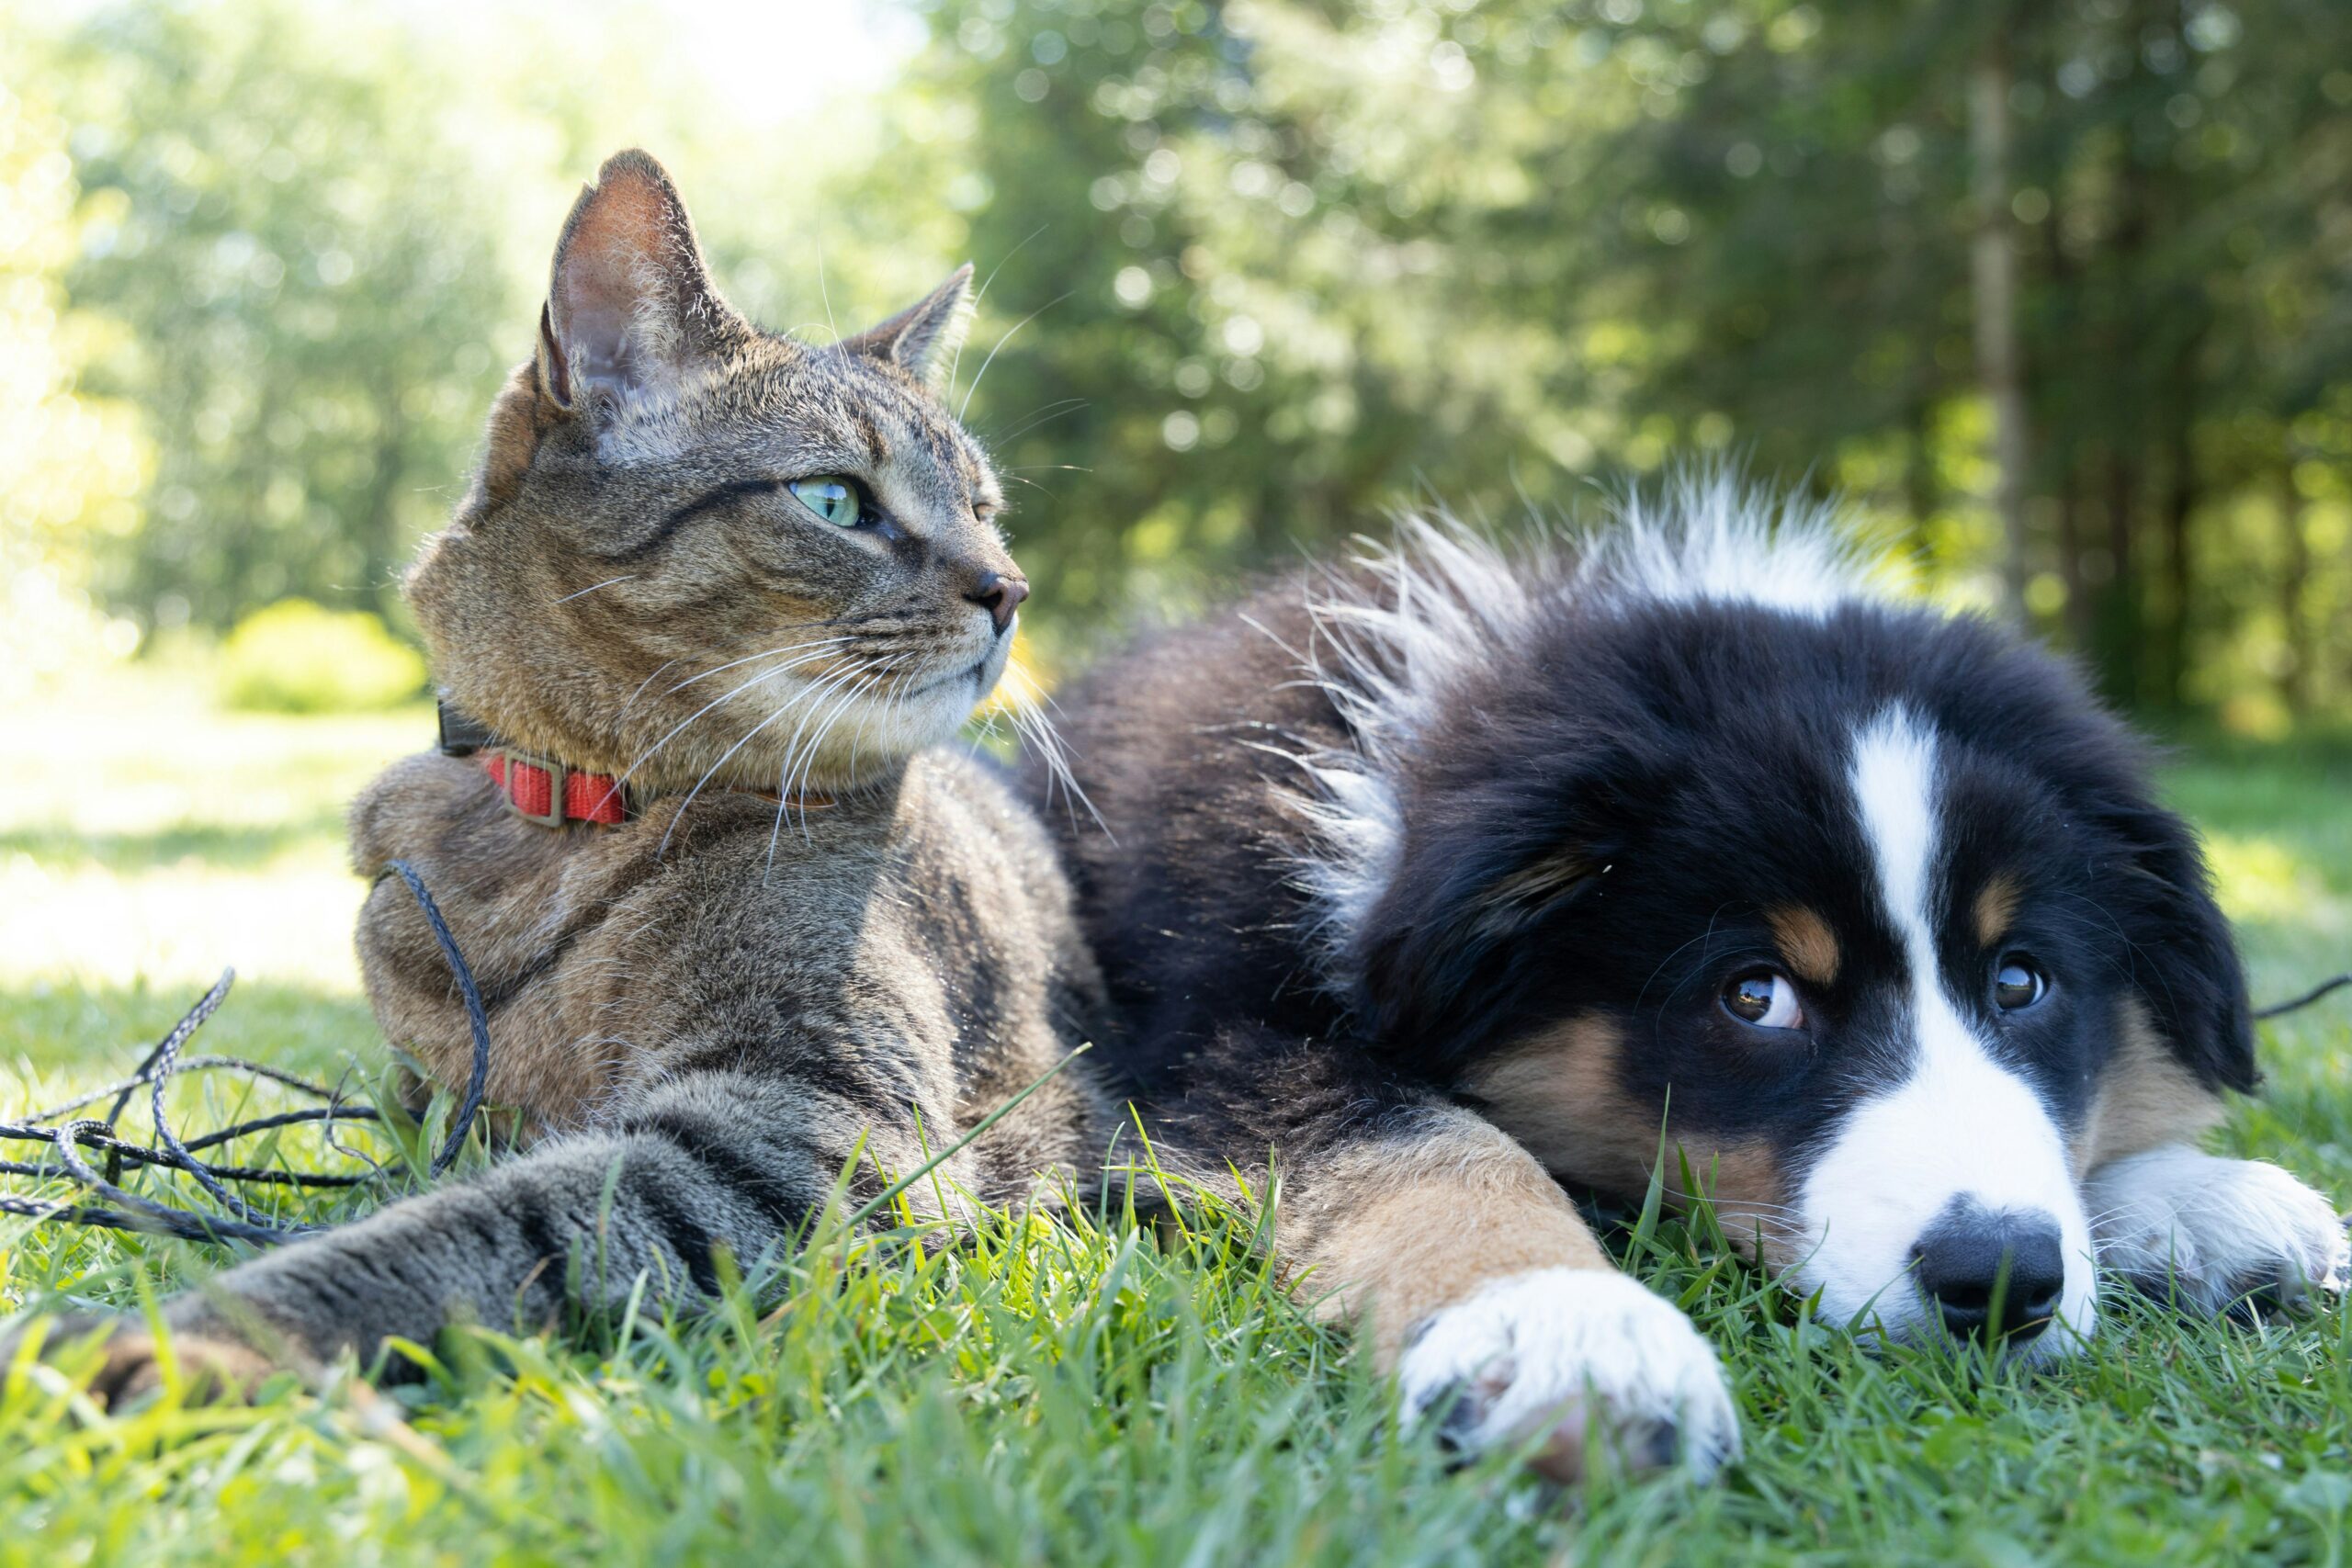 Life with Pets: Heartwarming Stories of Unbreakable Bonds Between Humans and Animals